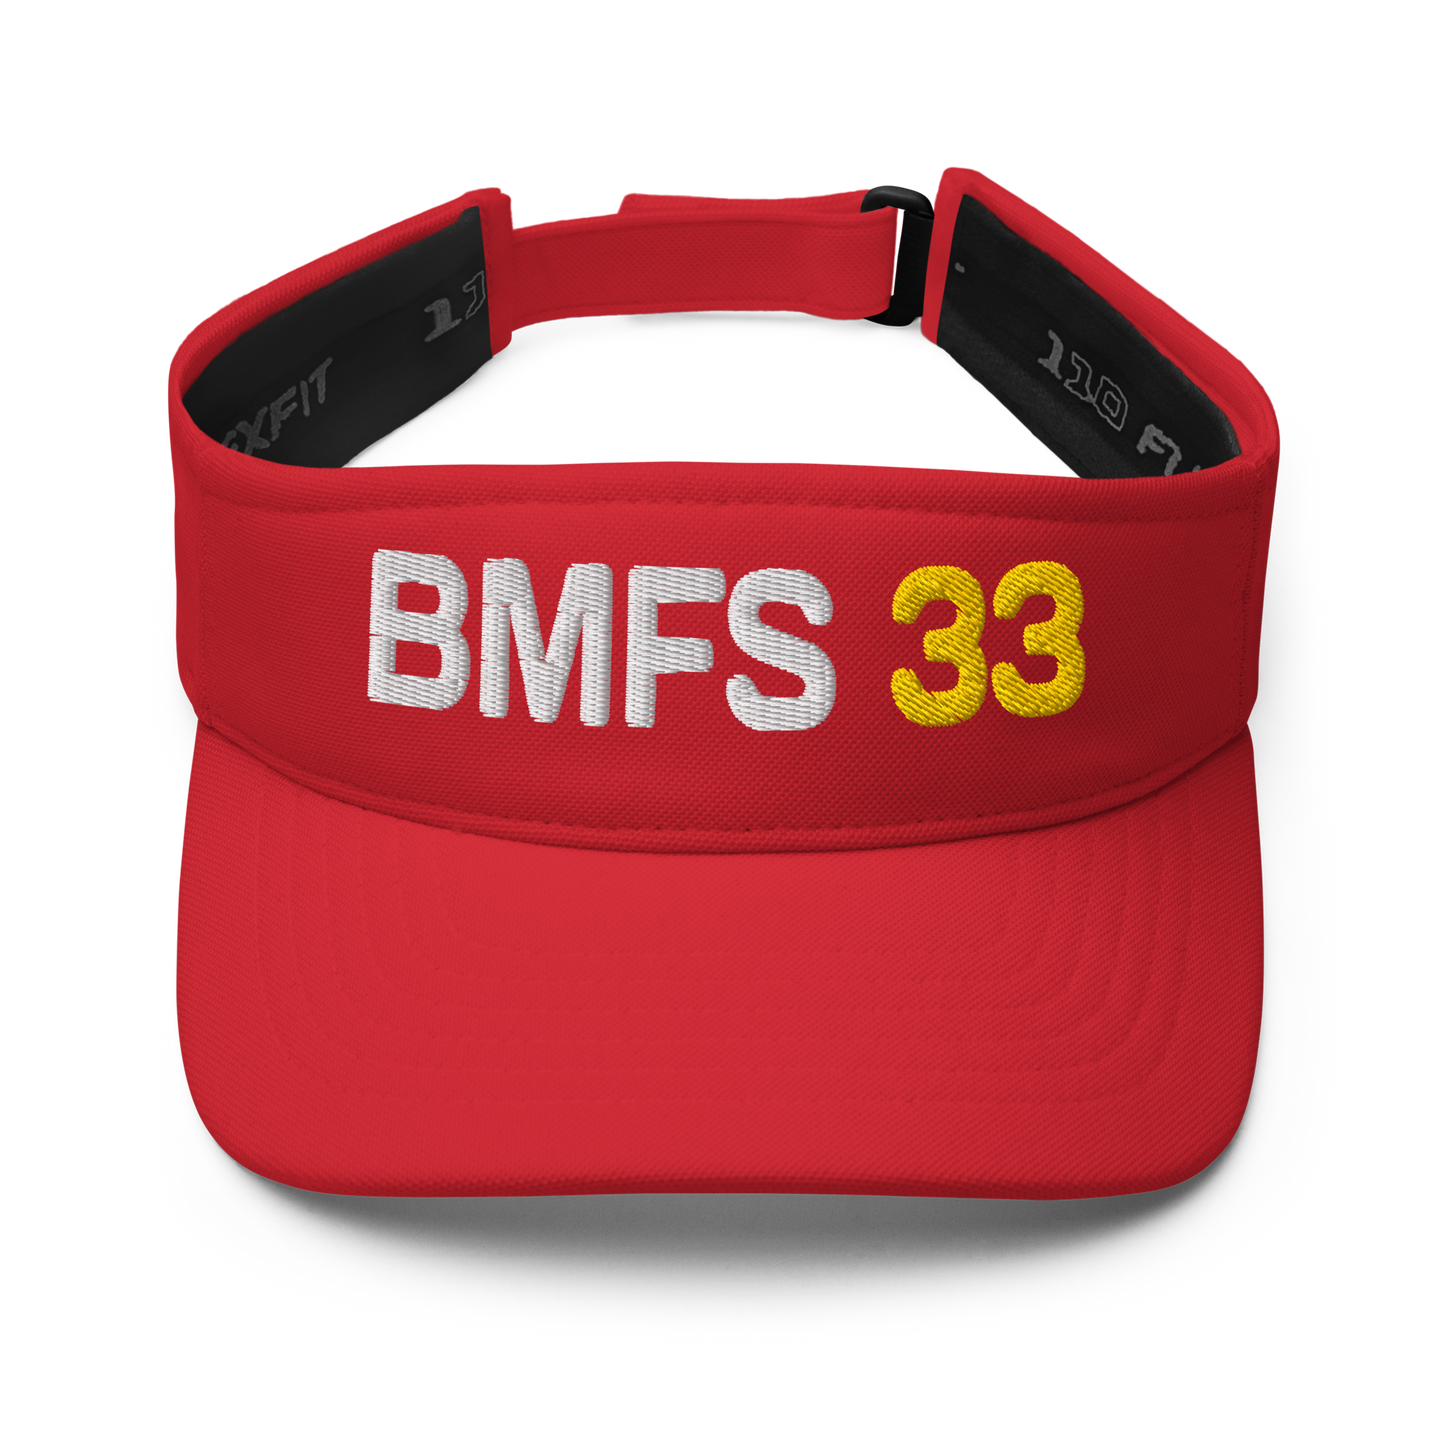 BMFS 33 | Flat Embroidery | Inspired Strings Art Cap | Lot Style Visor | Bluegrass Band Swag